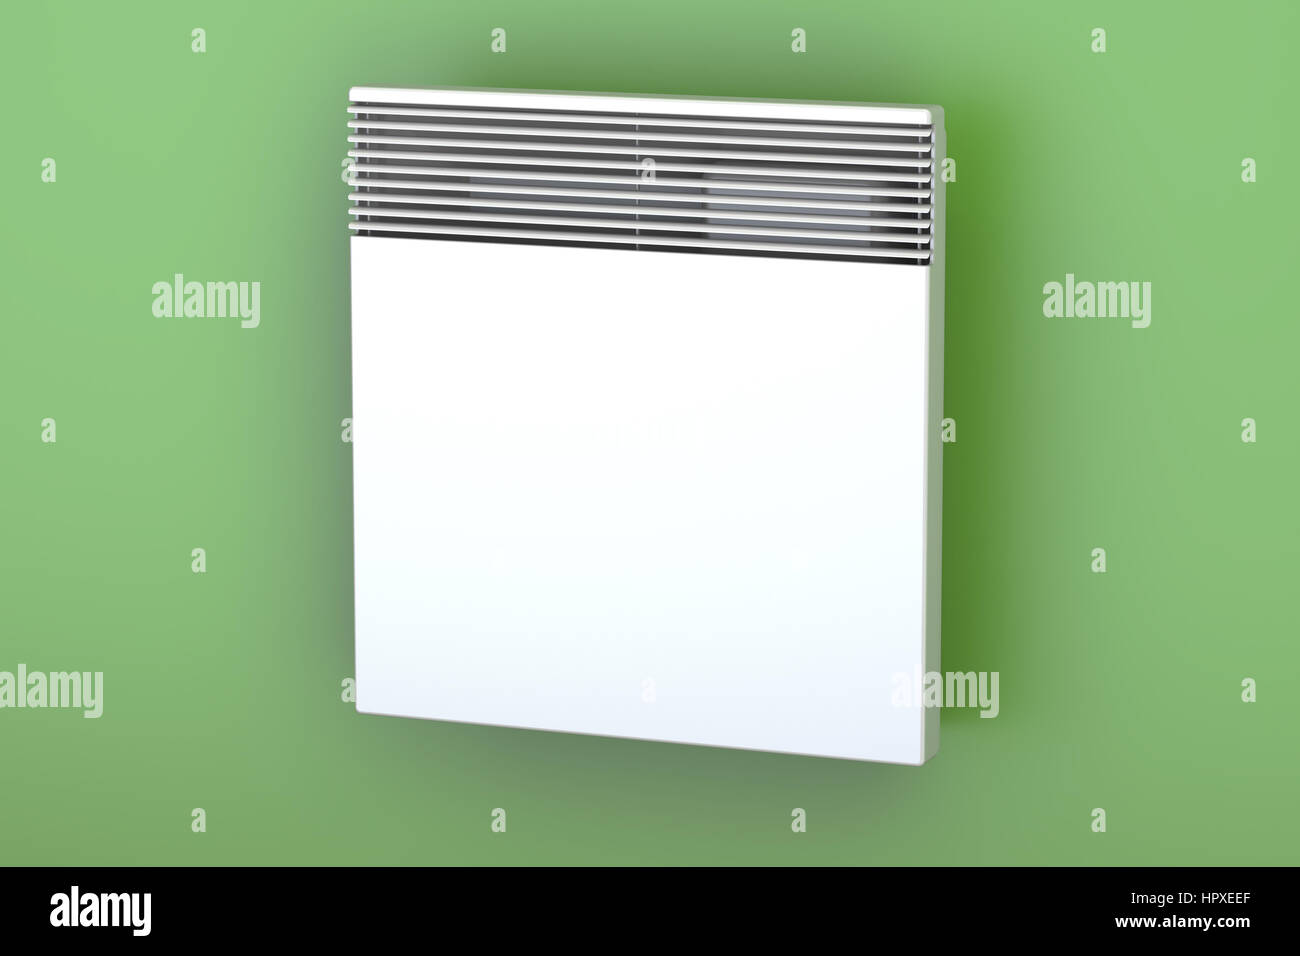 Convection heater on the wall, 3D rendering Stock Photo